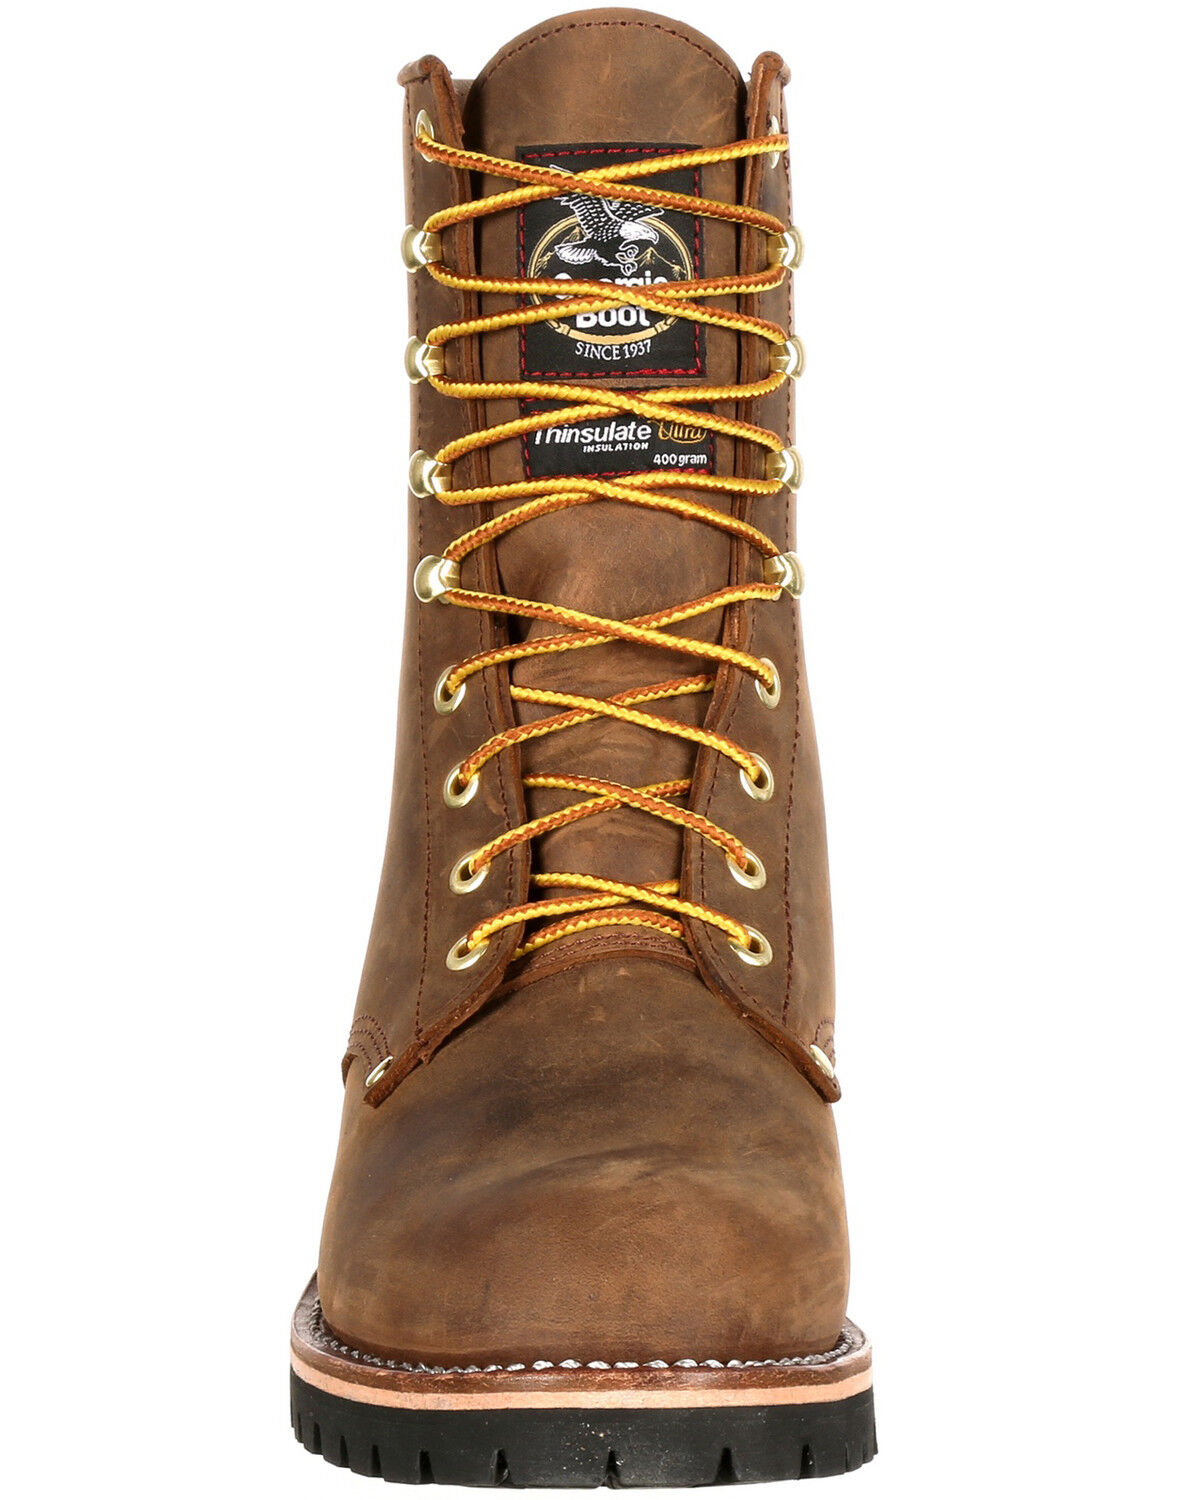 men's insulated logger boots